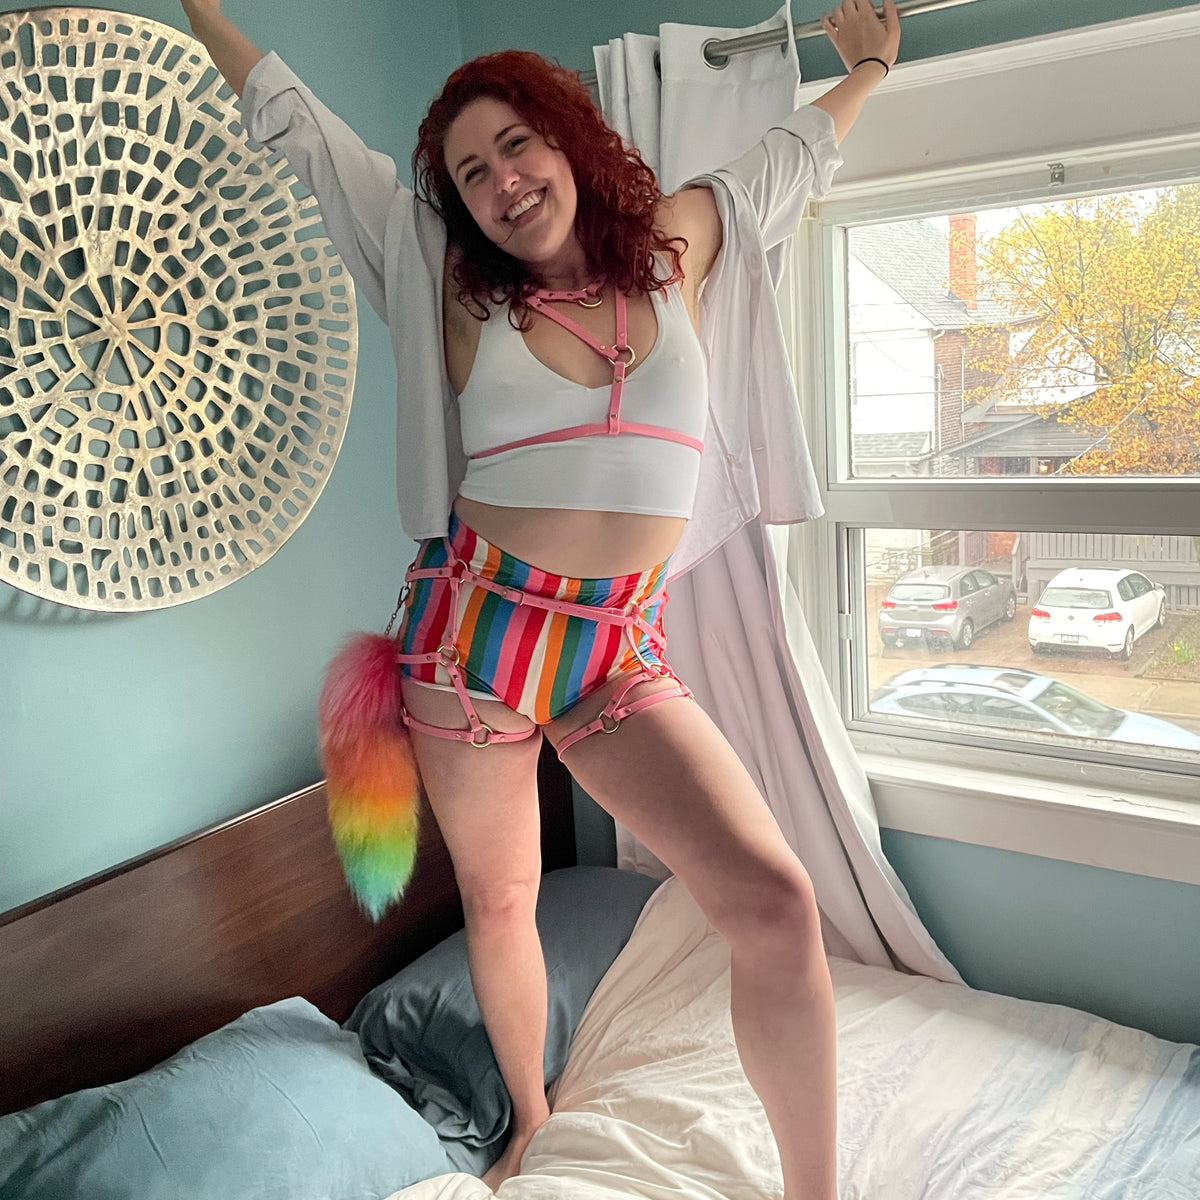 Woman poses on a bed wearing rainbow shorts white crop top pink chest bra harness and thigh harness outfit